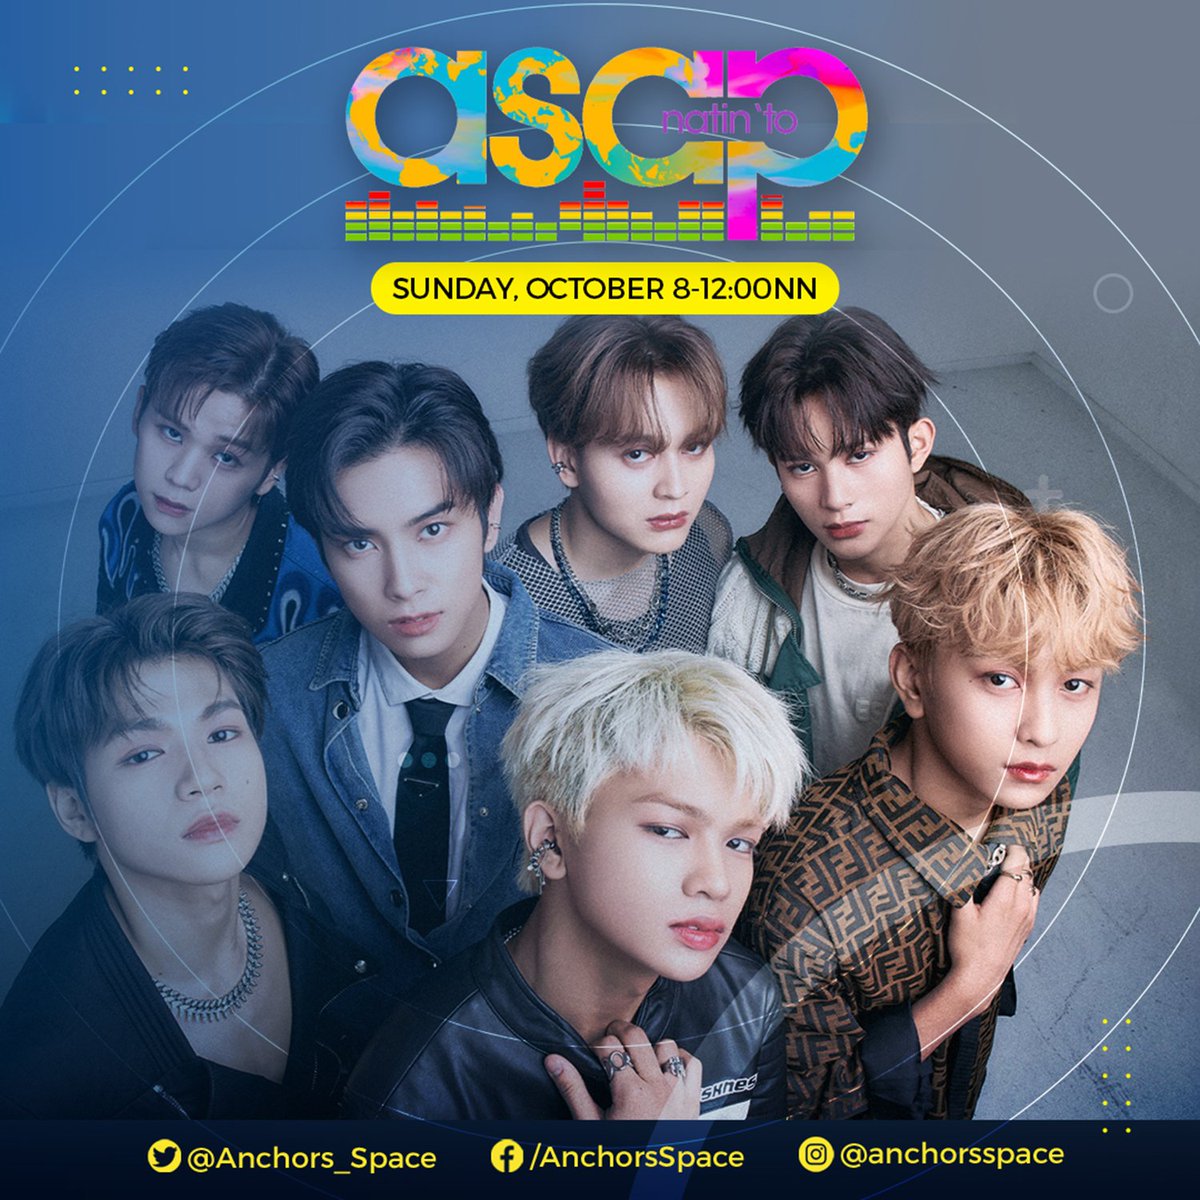 Anchors assemble! Catch HORI7ON as they perform live today at ASAP Stage, 12 noon. Let's show them our support by tuning in with the loudest cheers to our boys! HORI7ON NATIN TO #HORI7ON_On_ASAPLIVE #HORI7ON #호라이즌 #WeAreOneForSeven @HORI7ONofficial @HORI7ON_twt